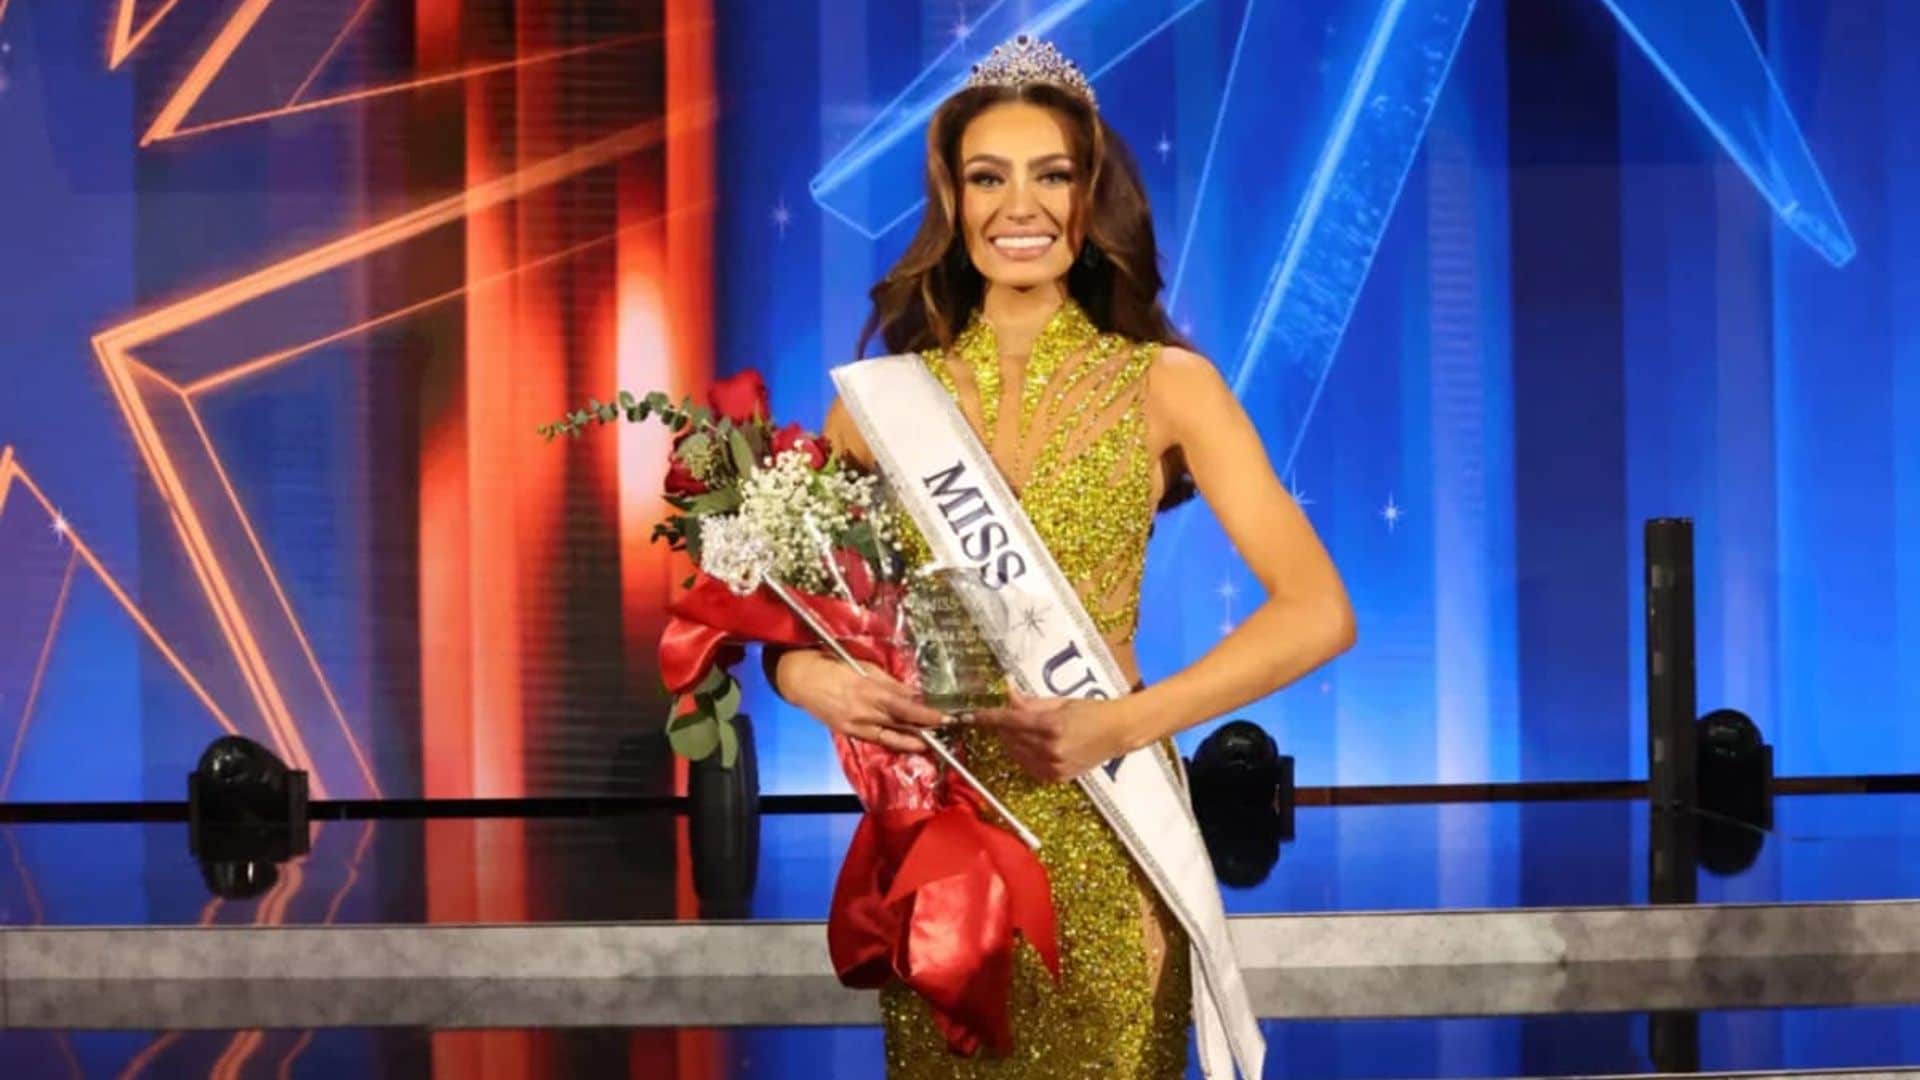 Miss USA 2023 Noelia Voigt steps down: Organization will name a new queen ‘soon’